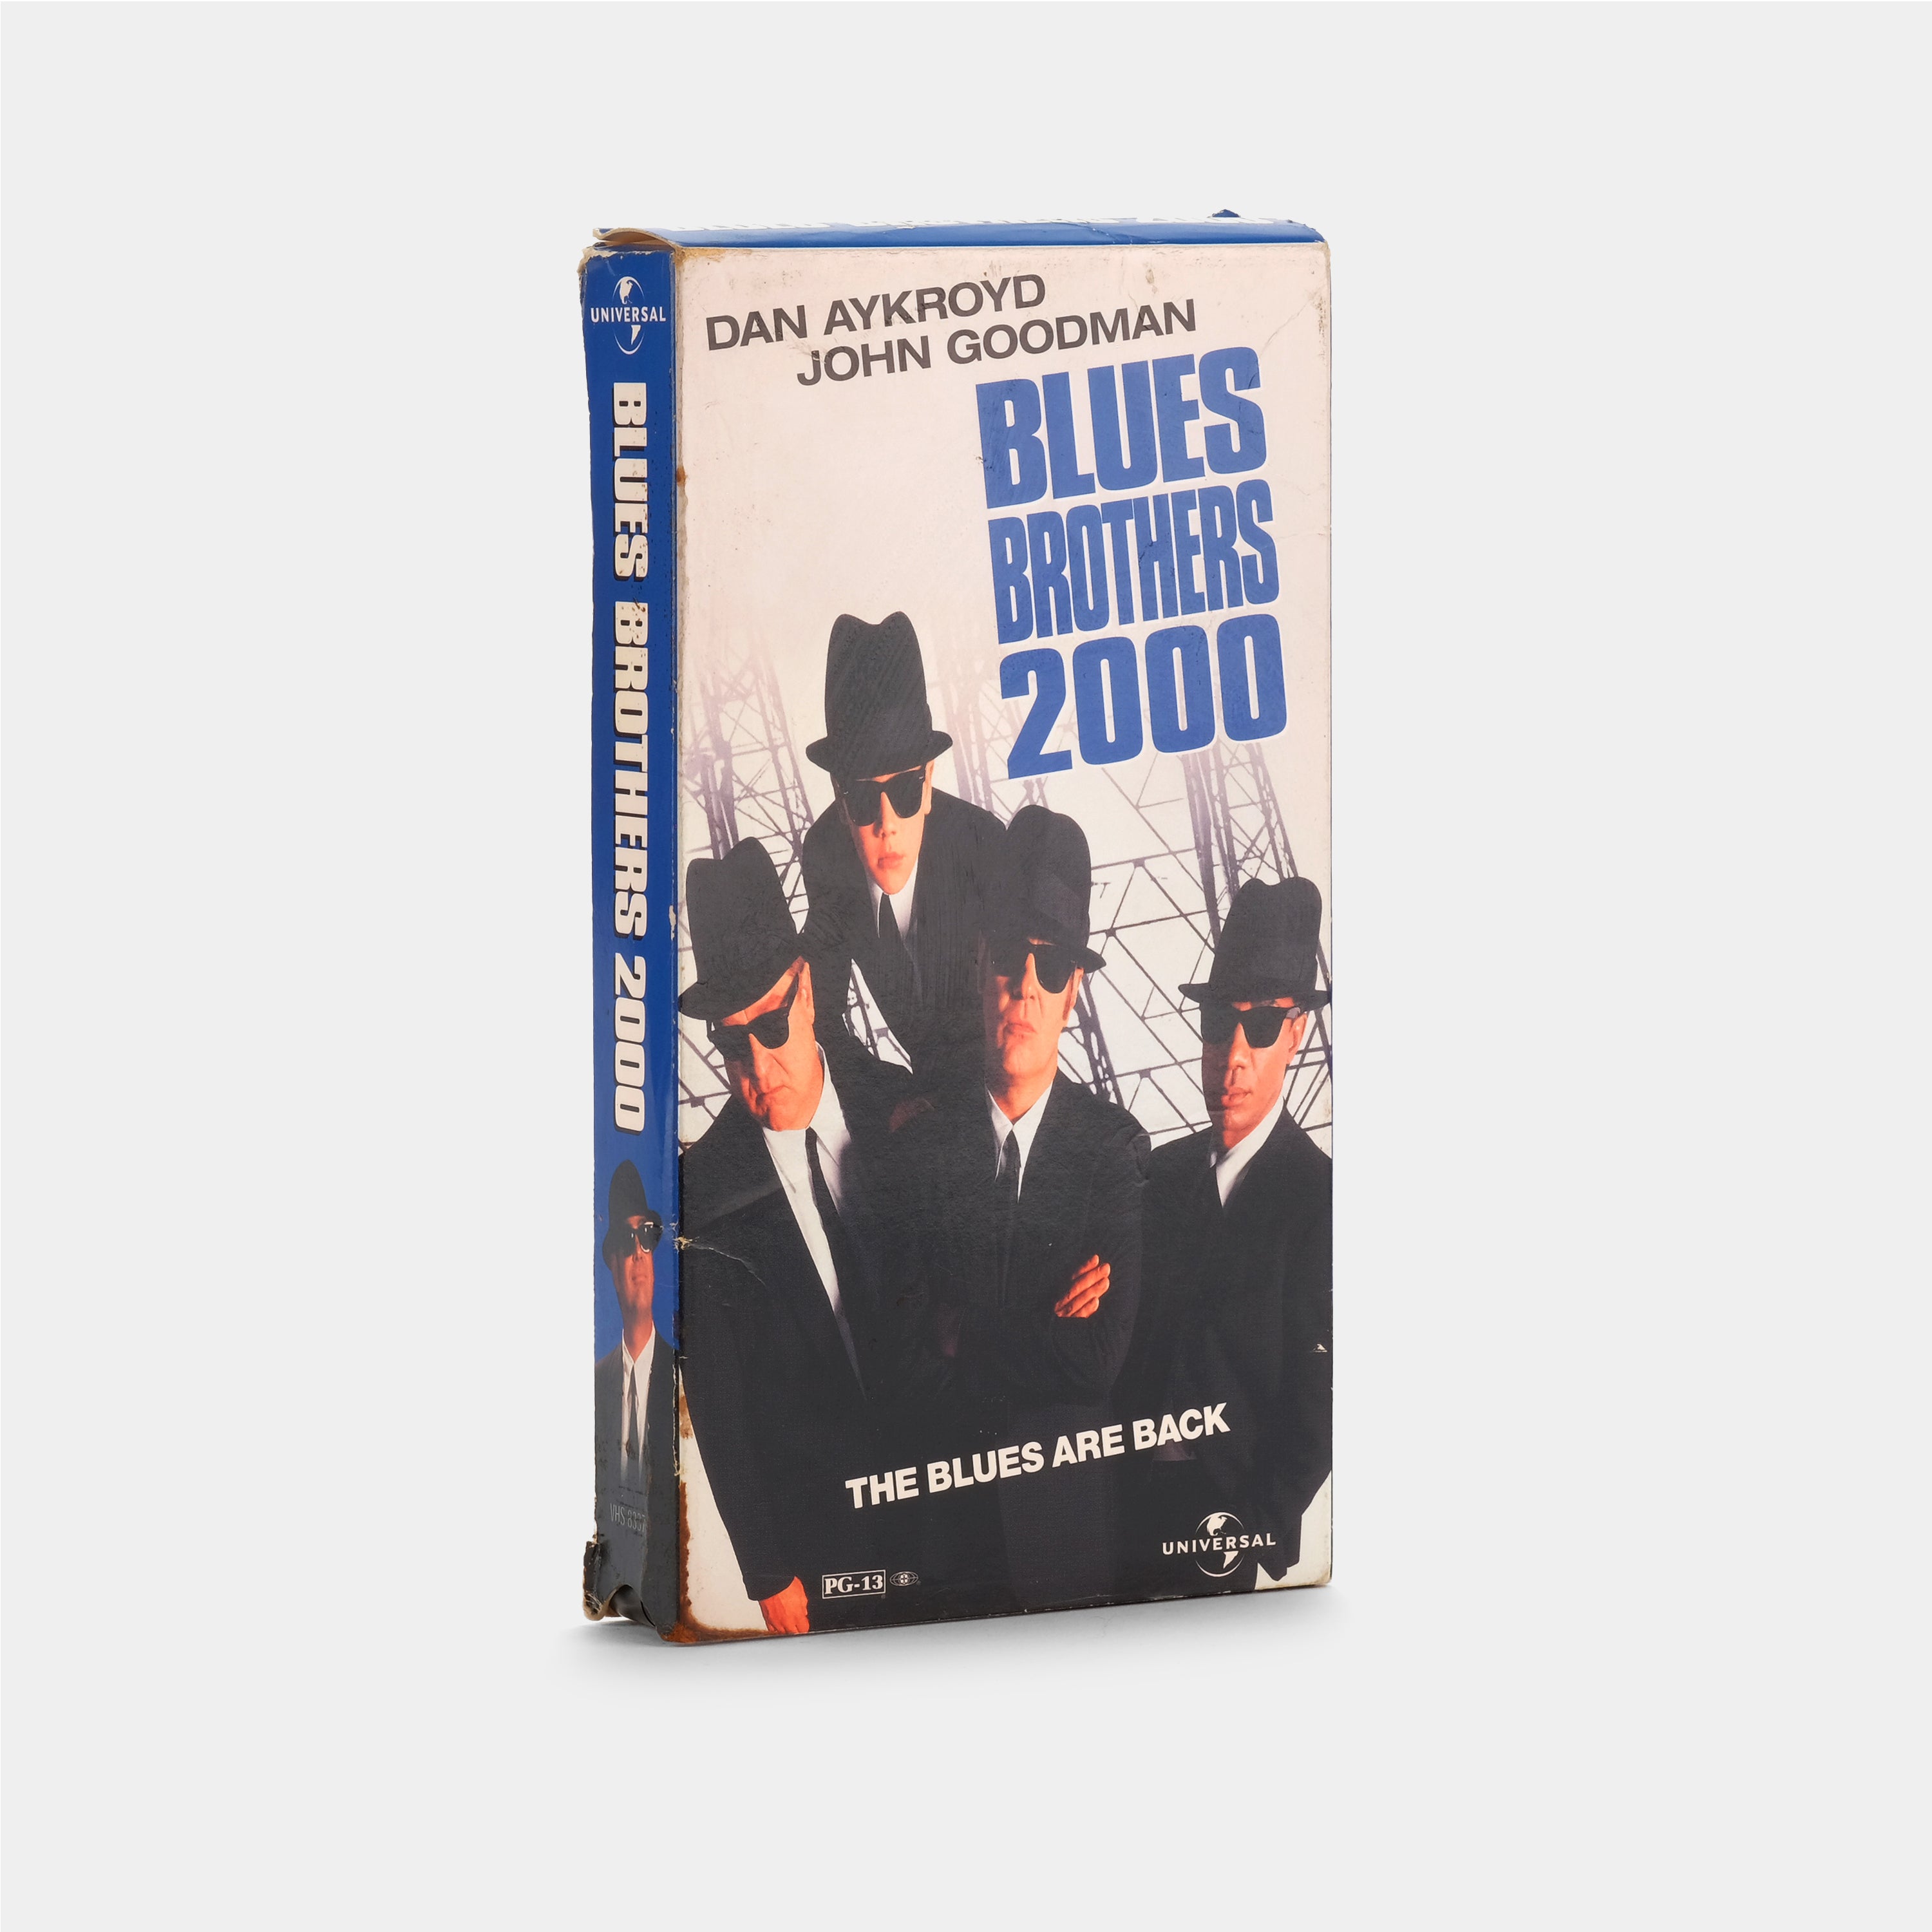 Blues Brothers 2000 VHS Tape